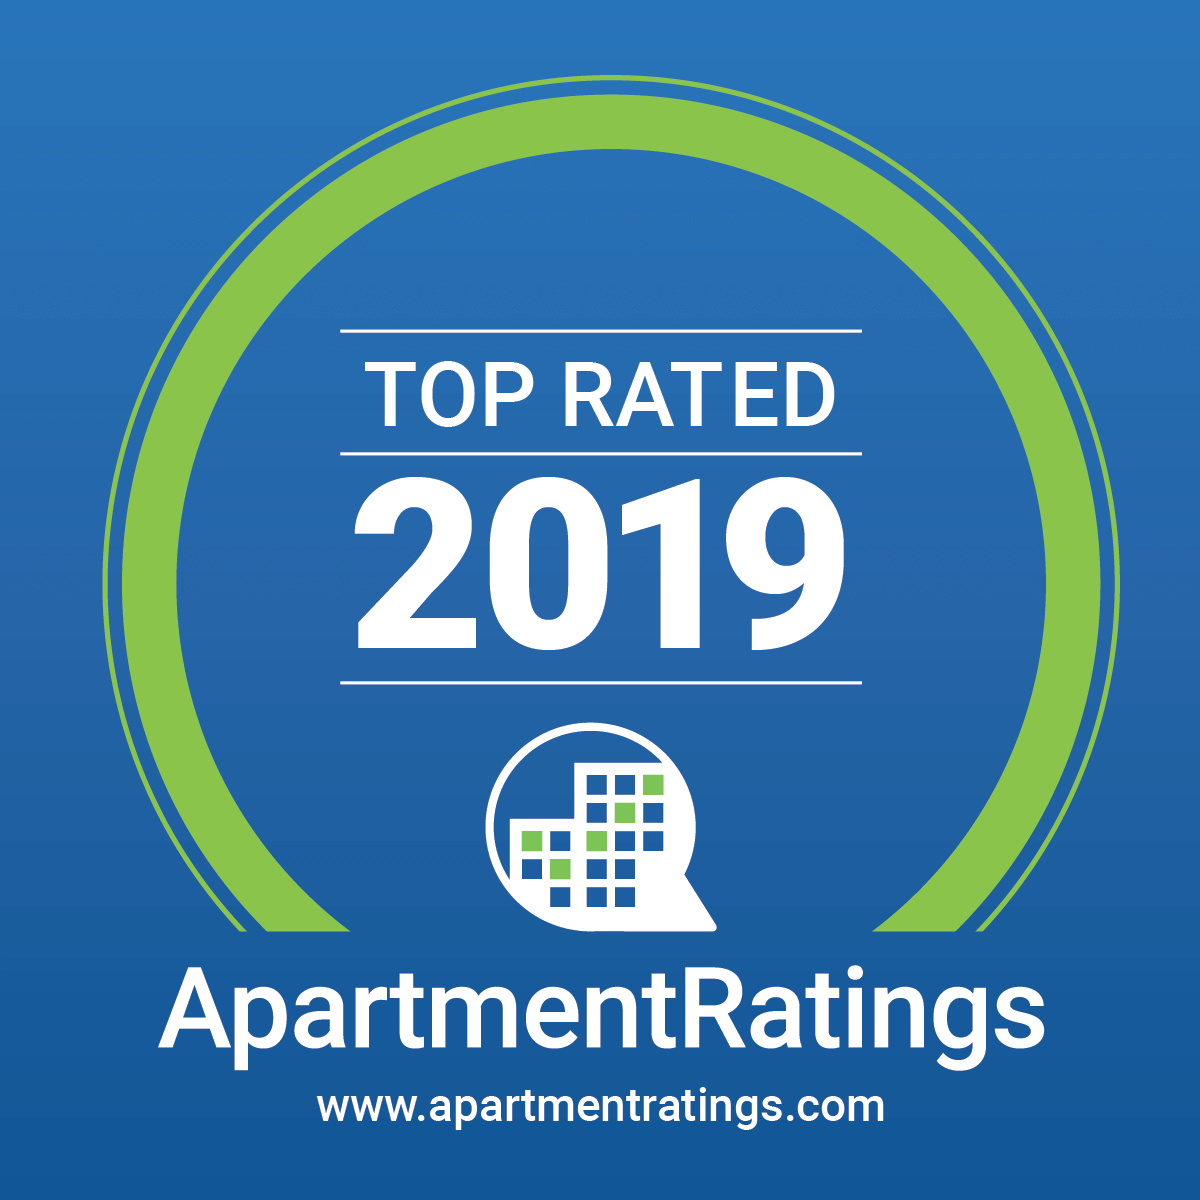 Top Rated 2019 ApartmentRatings